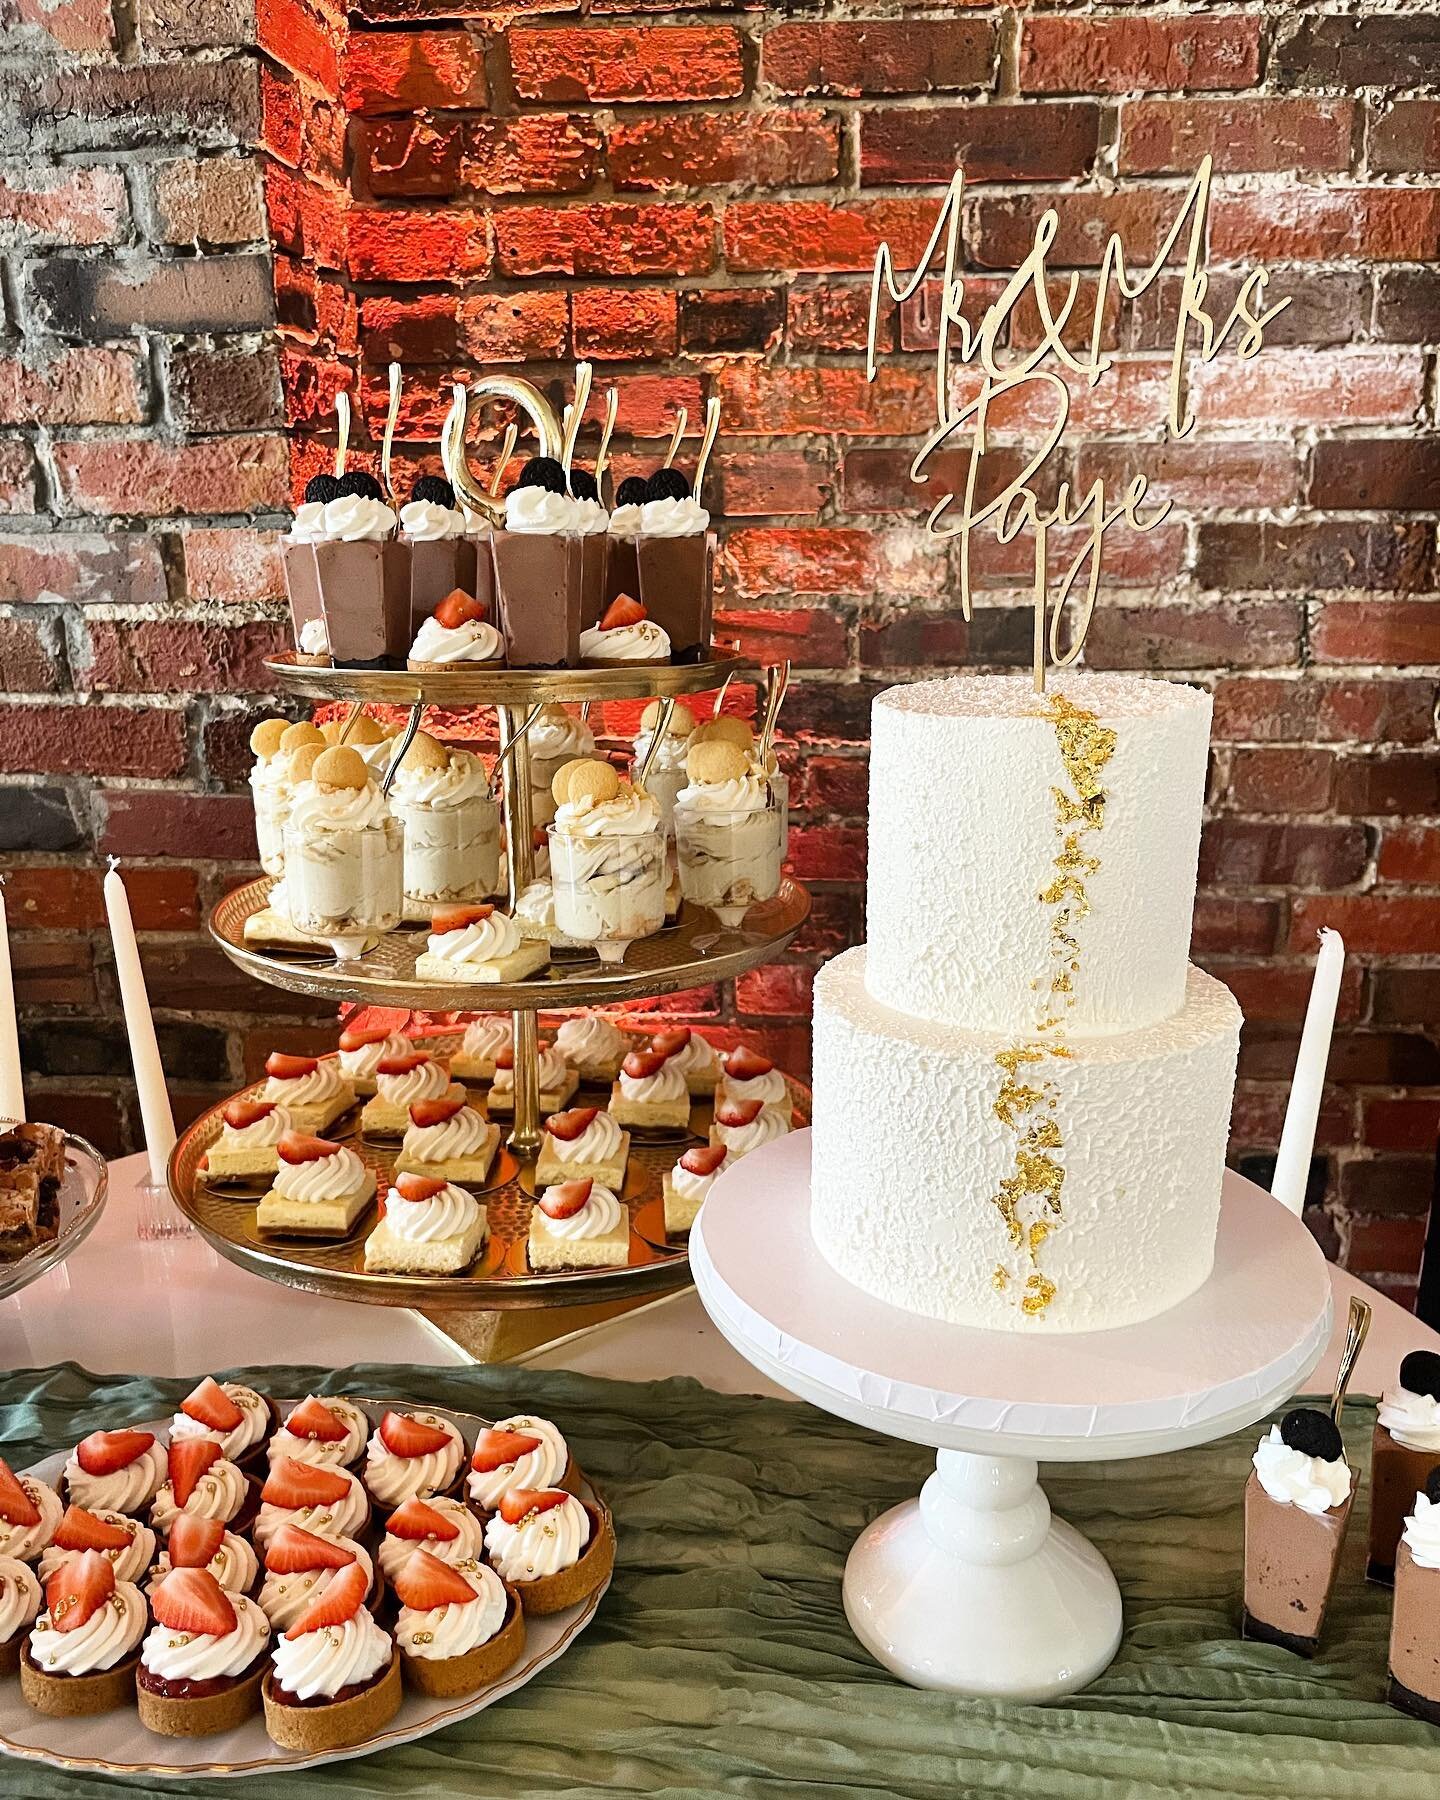 Happy New Year's!!!

Thank you to all our wonderful clients who trusted in us this past year to bring your dessert dreams to life for your wedding day!  We really appreciate each and everyone of you and looking forward to what 2024 brings.

Cheers!

